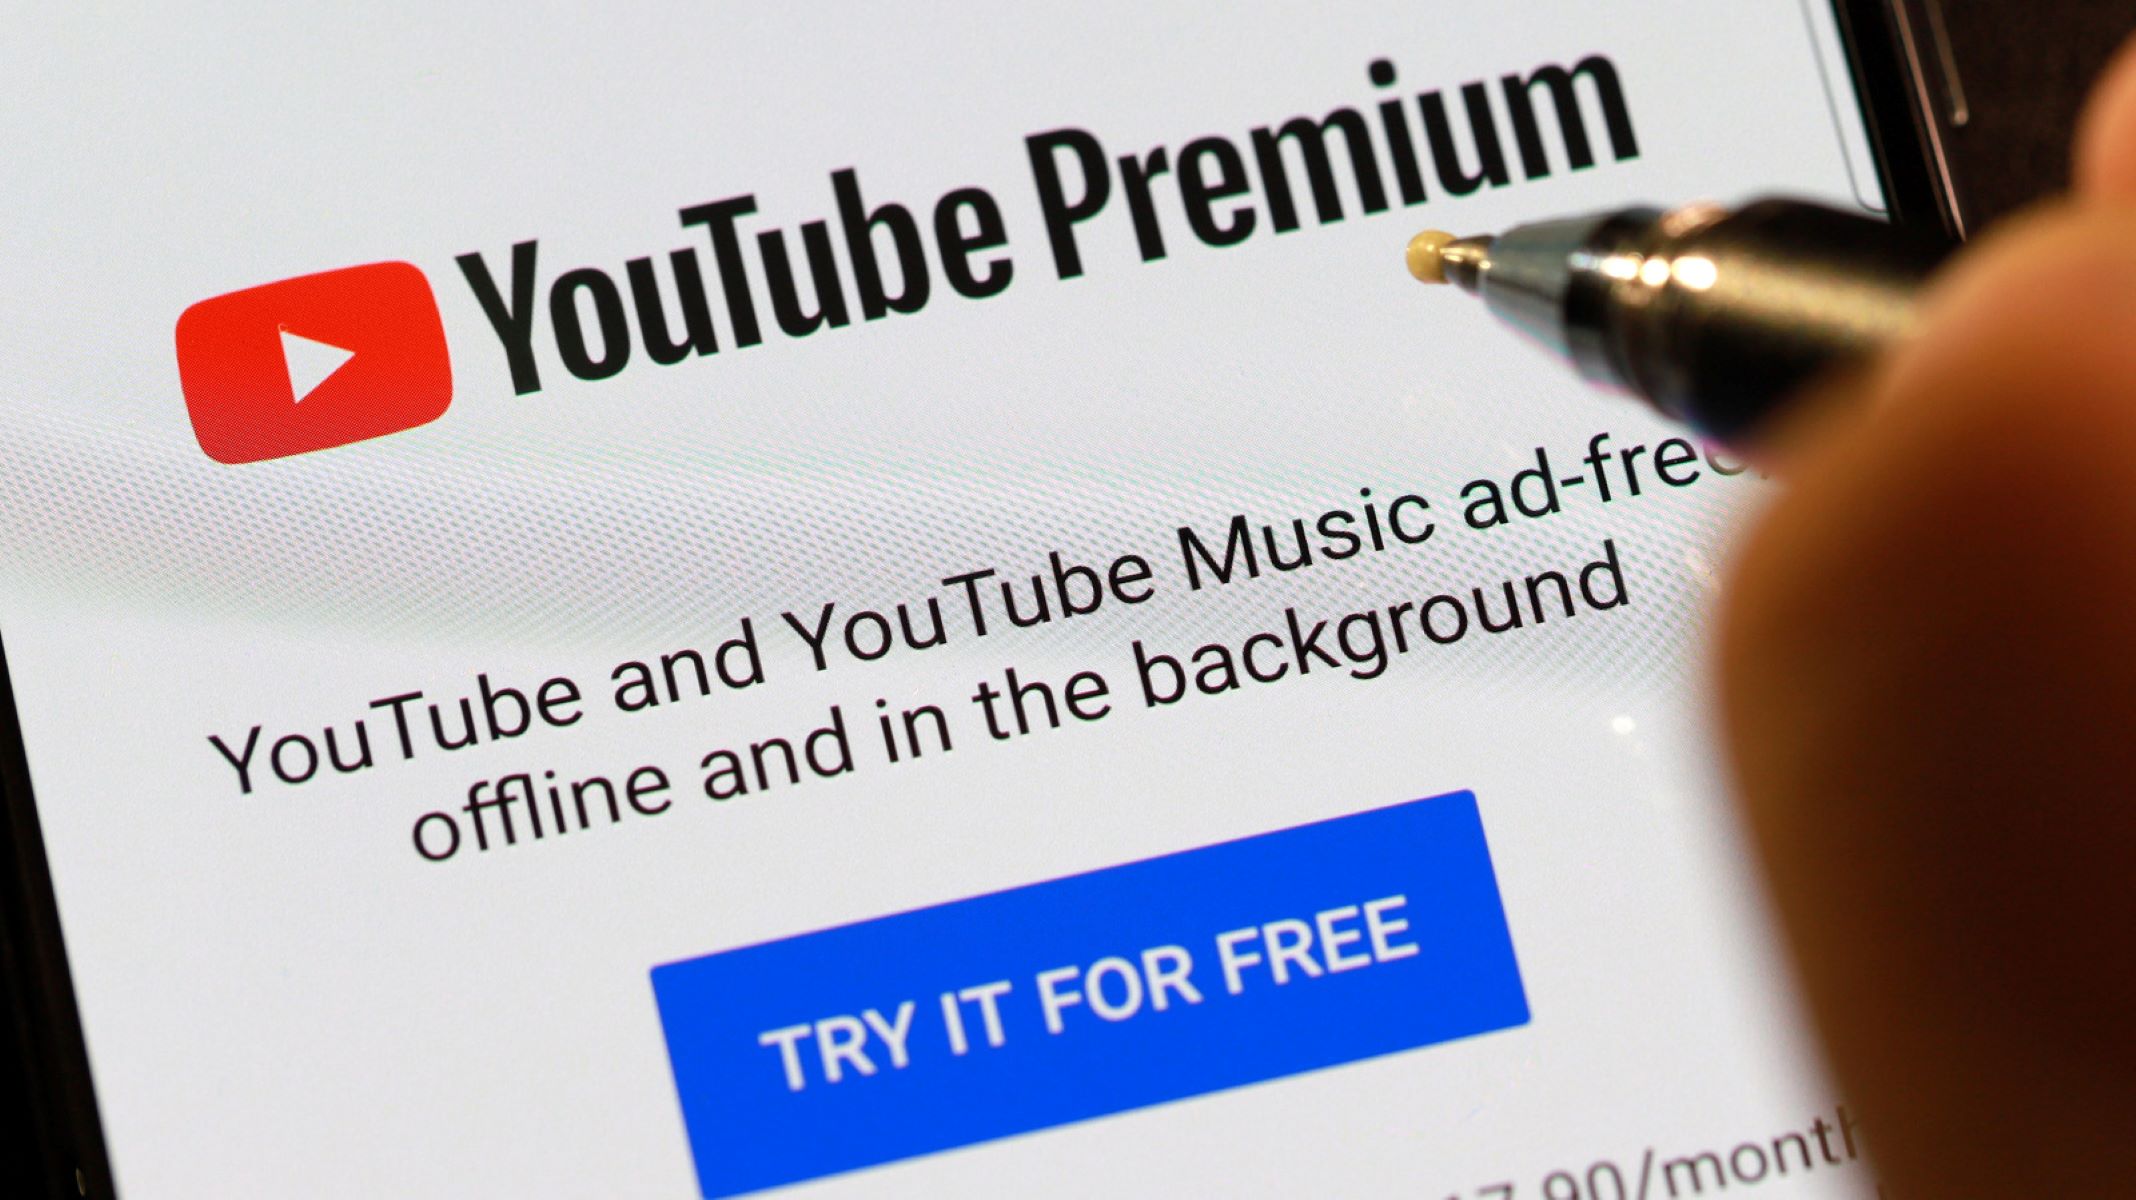 How To Get YouTube Premium For Free